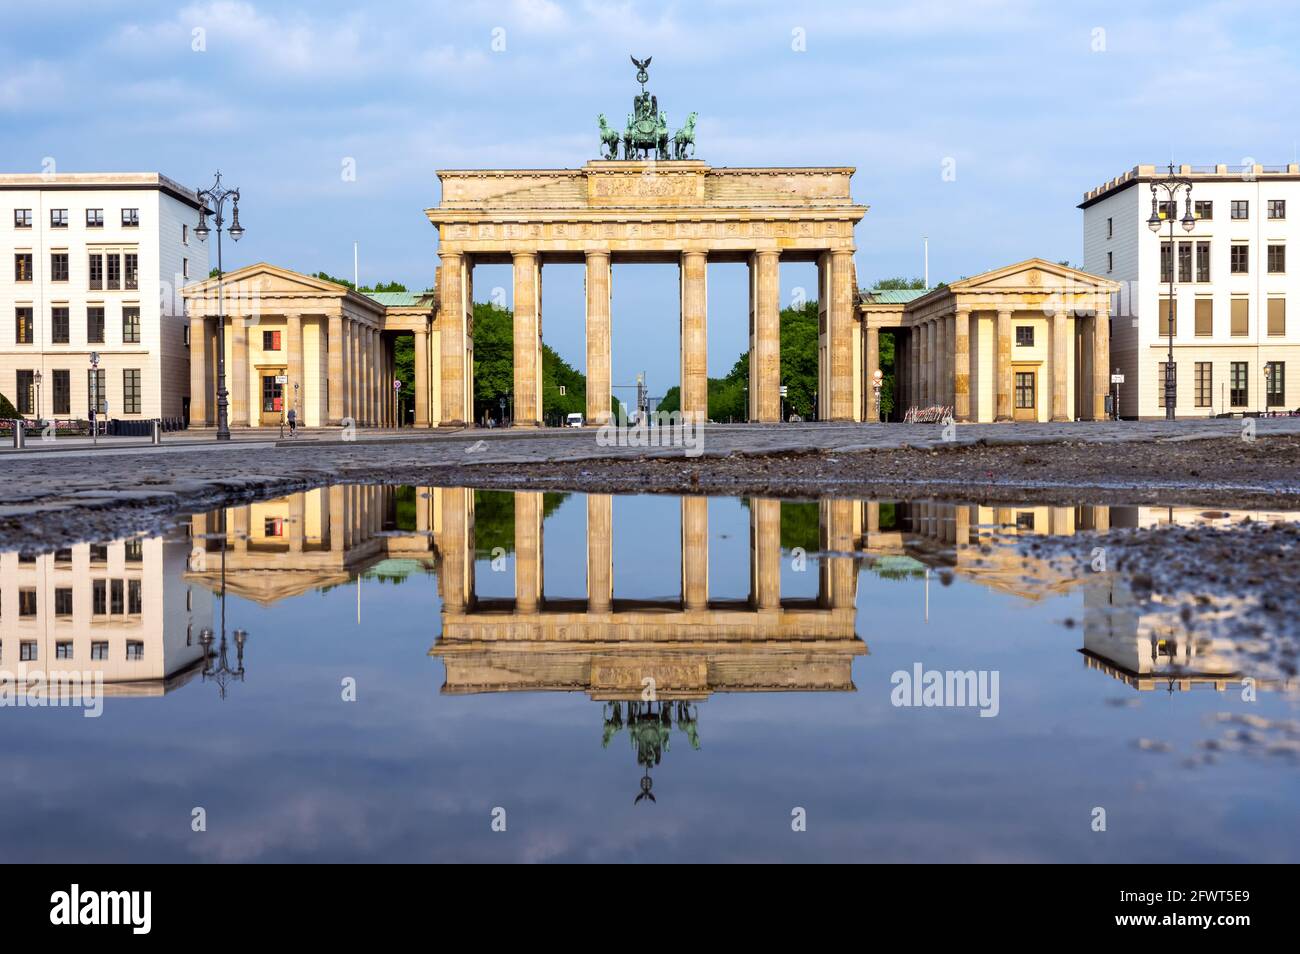 The famous Brandenburger Tor in Berlin reflected in a puddle Stock Photo